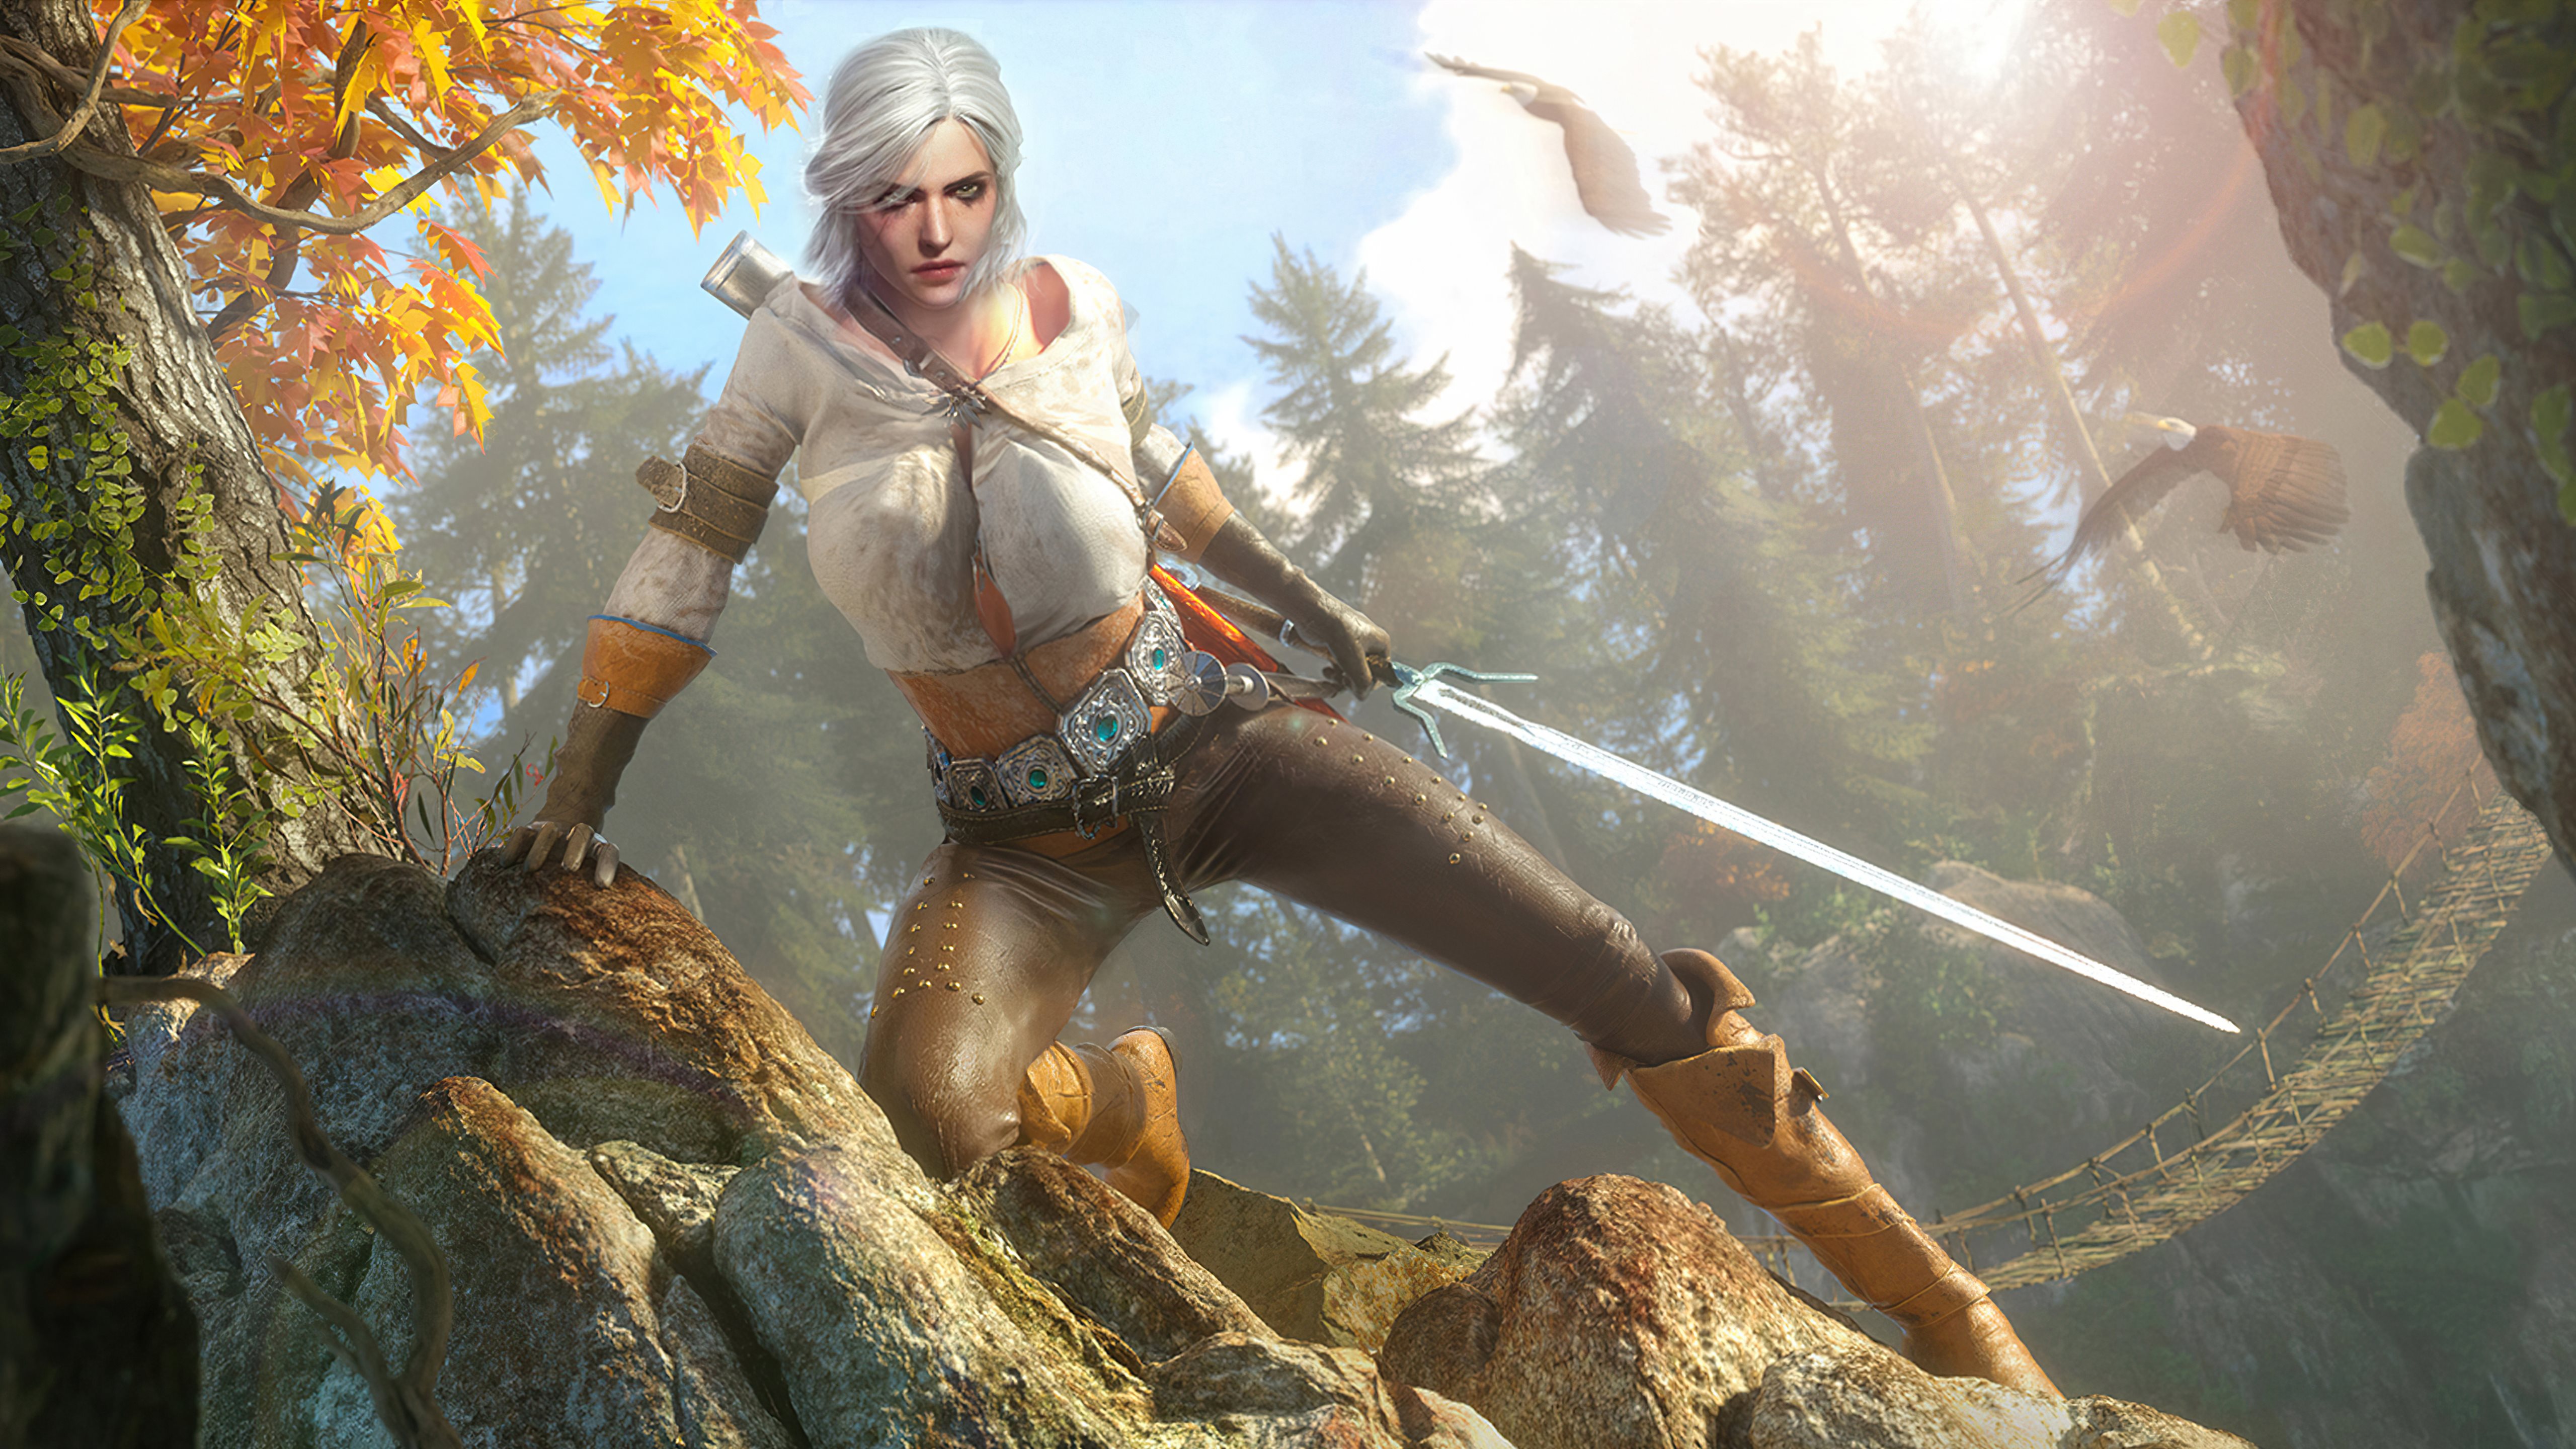 Witcher 3 Ciri Wallpapers